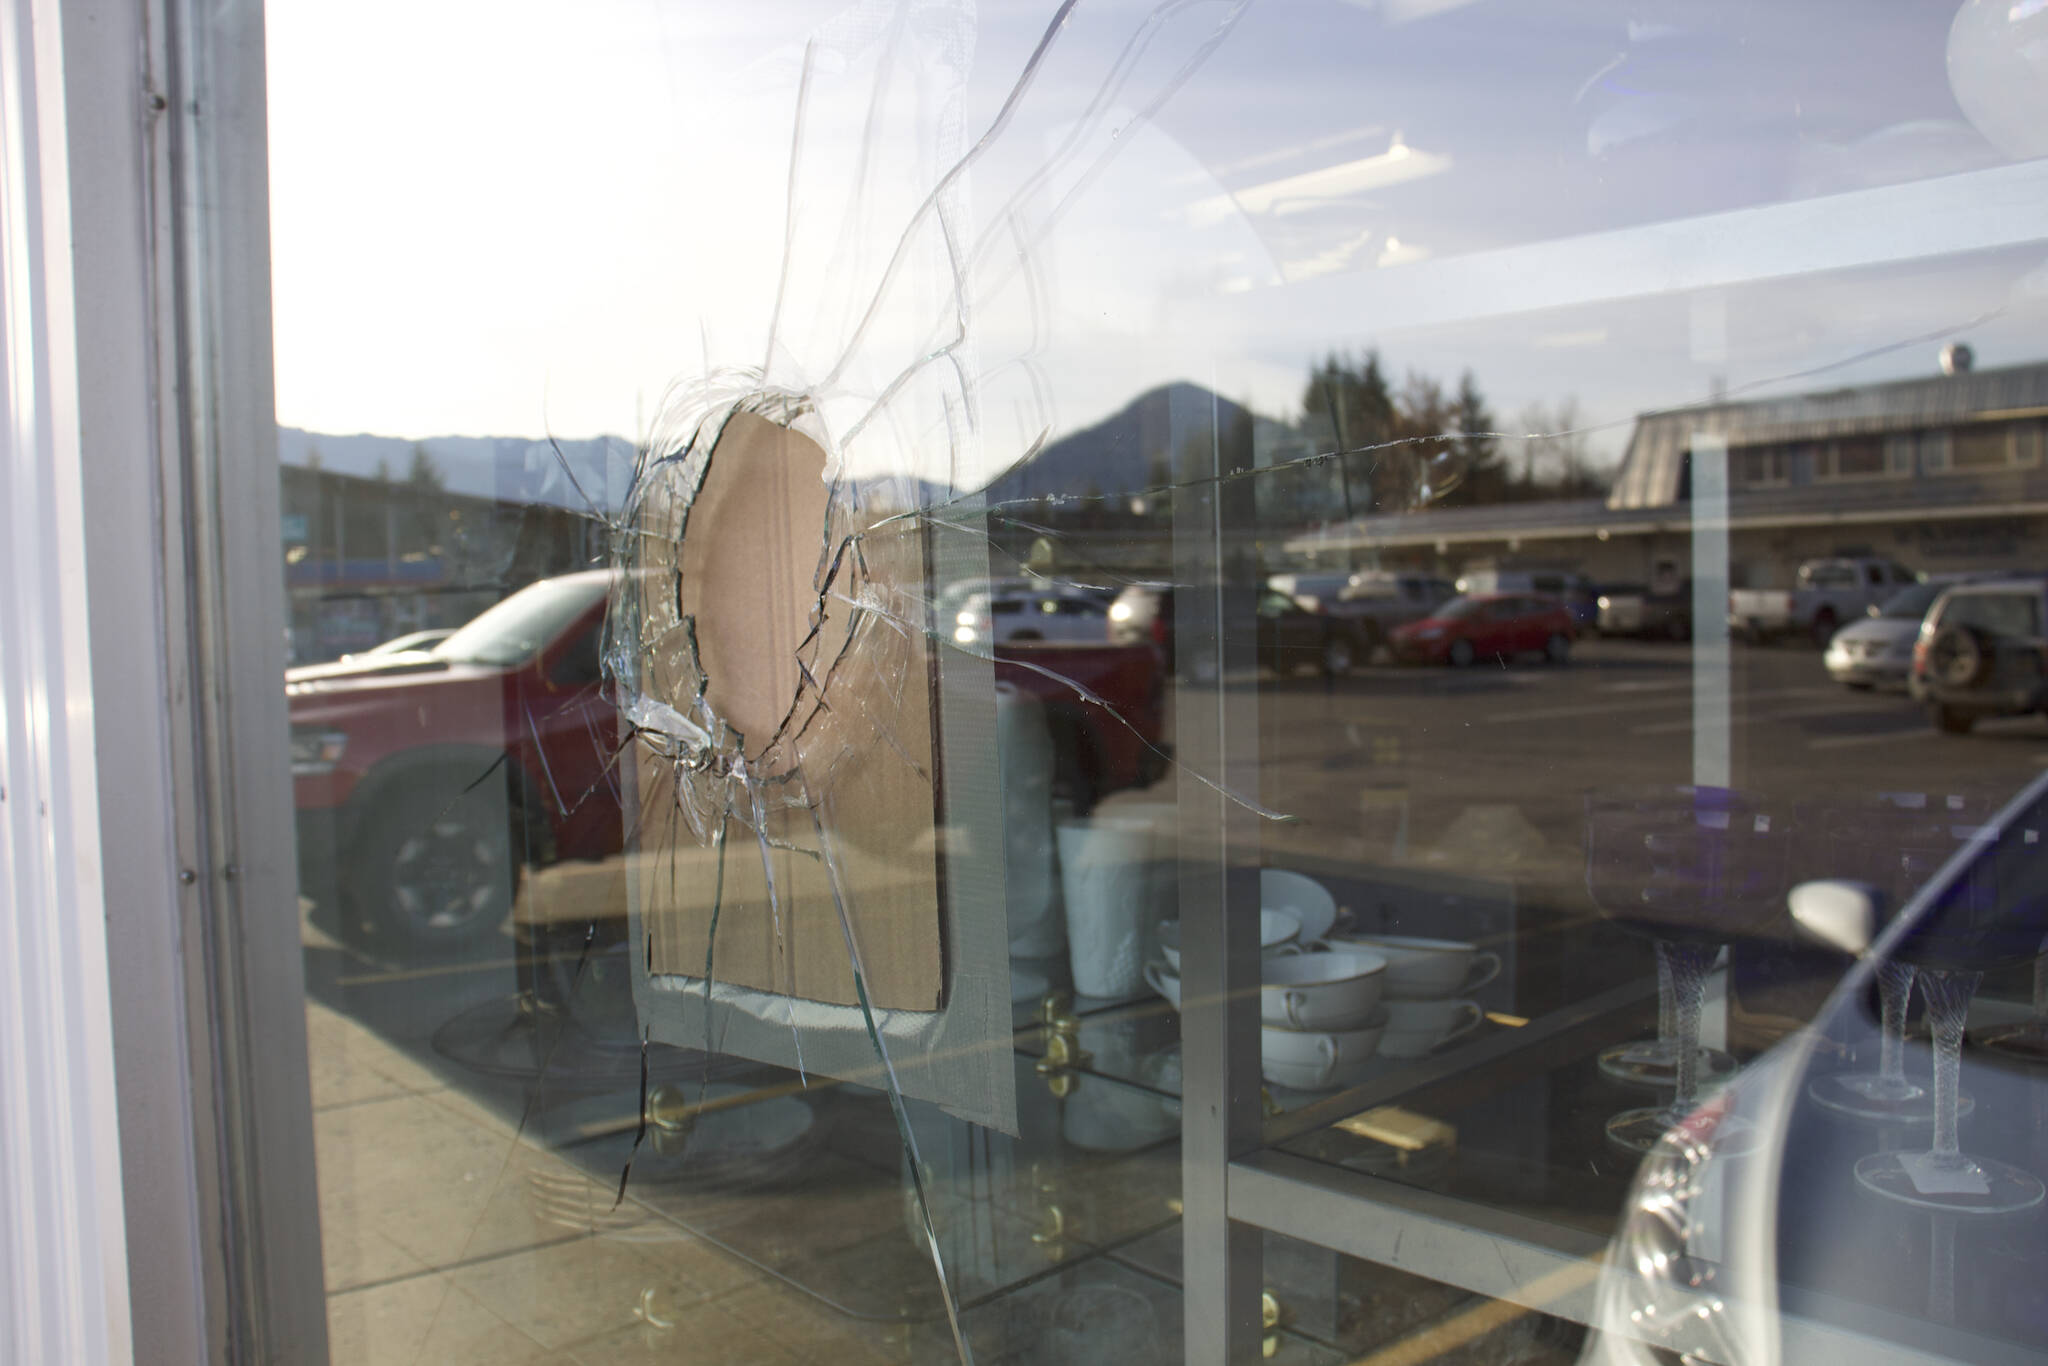 St. Vincent de Paul Thrift Store had a side window smashed, one of several places vandalized early Wednesday morning, according to police and store employees. (Meredith Jordan/ Juneau Empire)